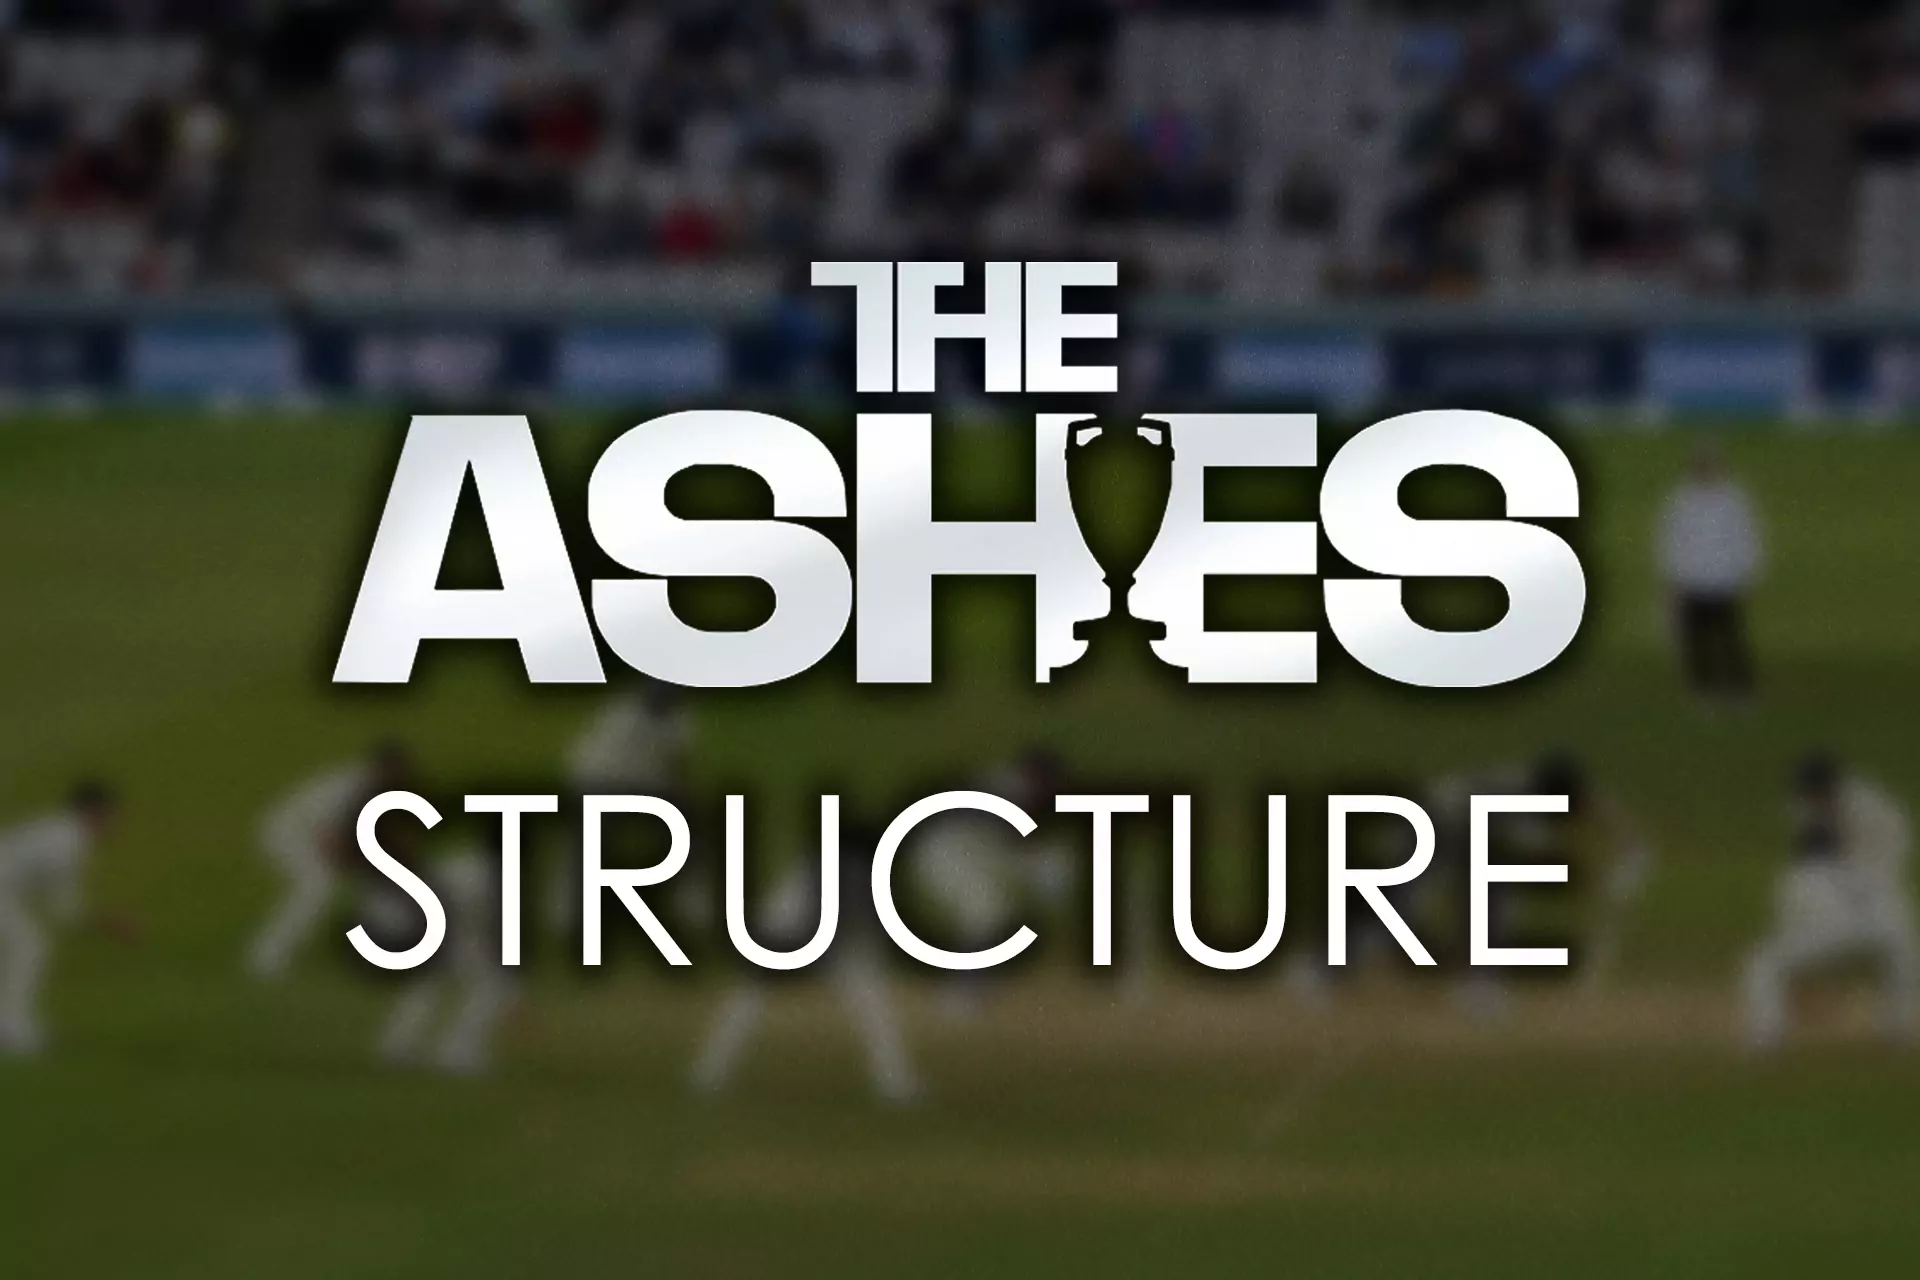 Usually, The Ashes Series consists of five matches between the England and Australia teams.